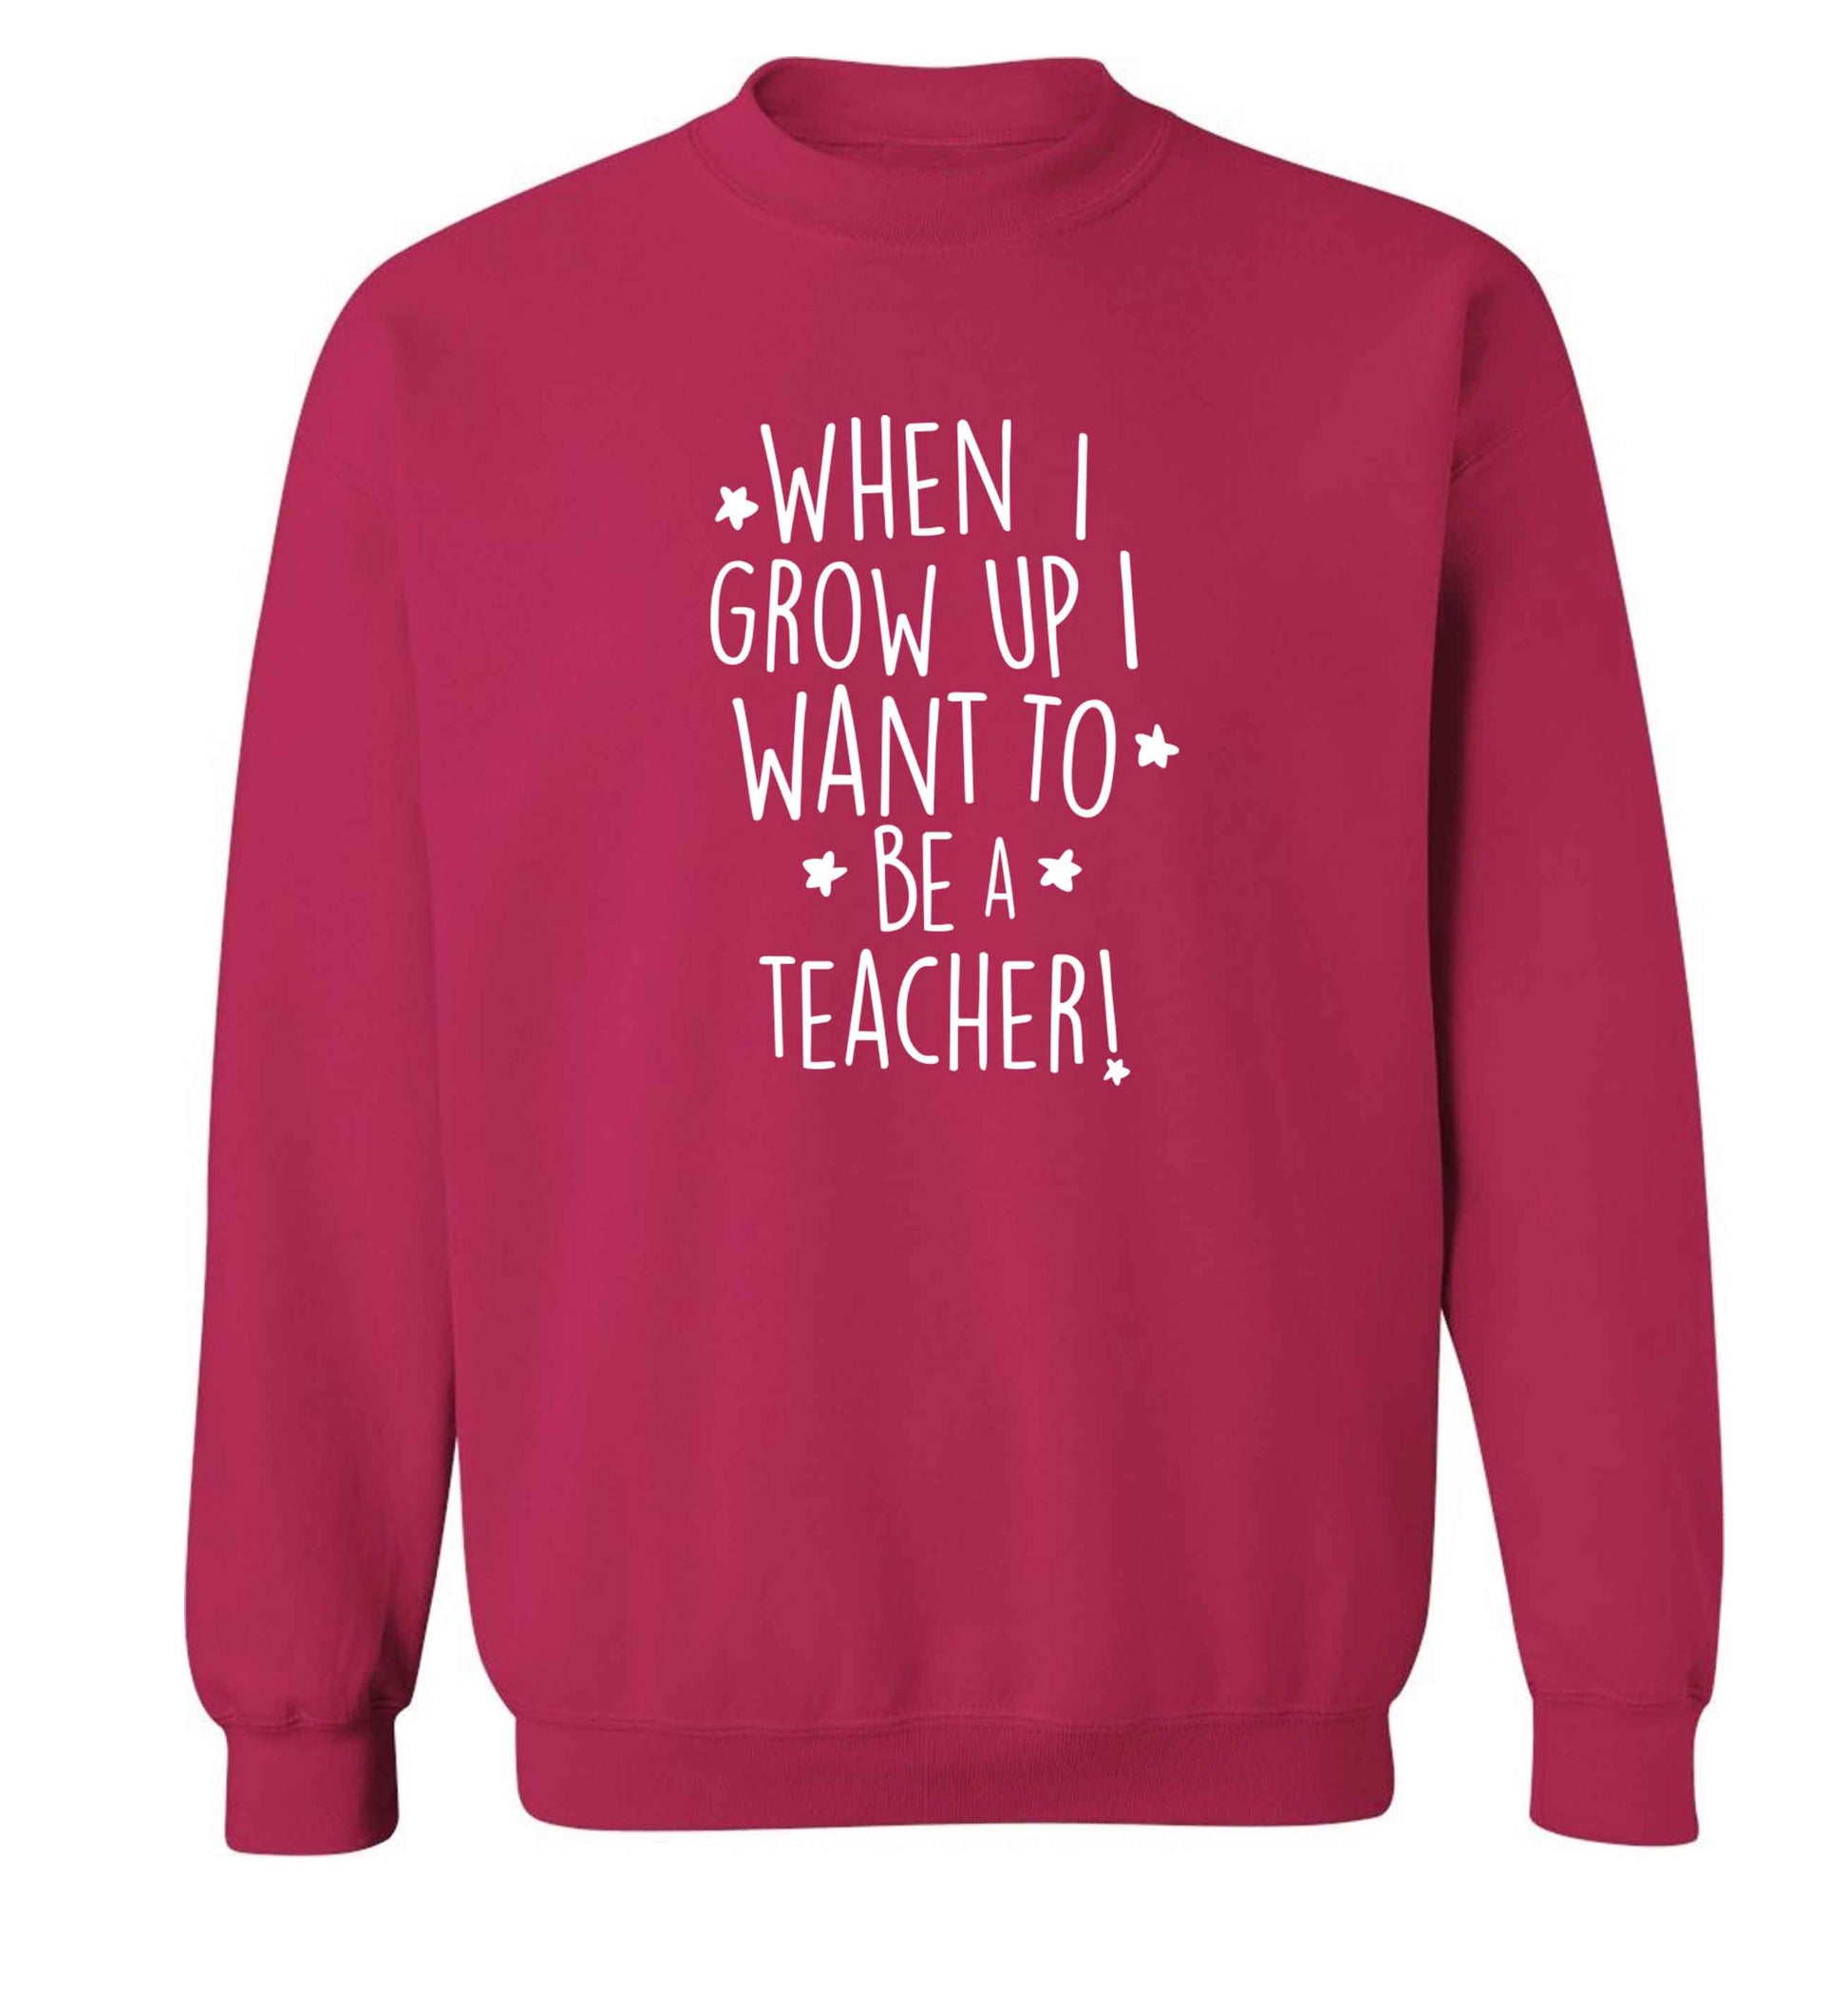 When I grow up I want to be a teacher adult's unisex pink sweater 2XL